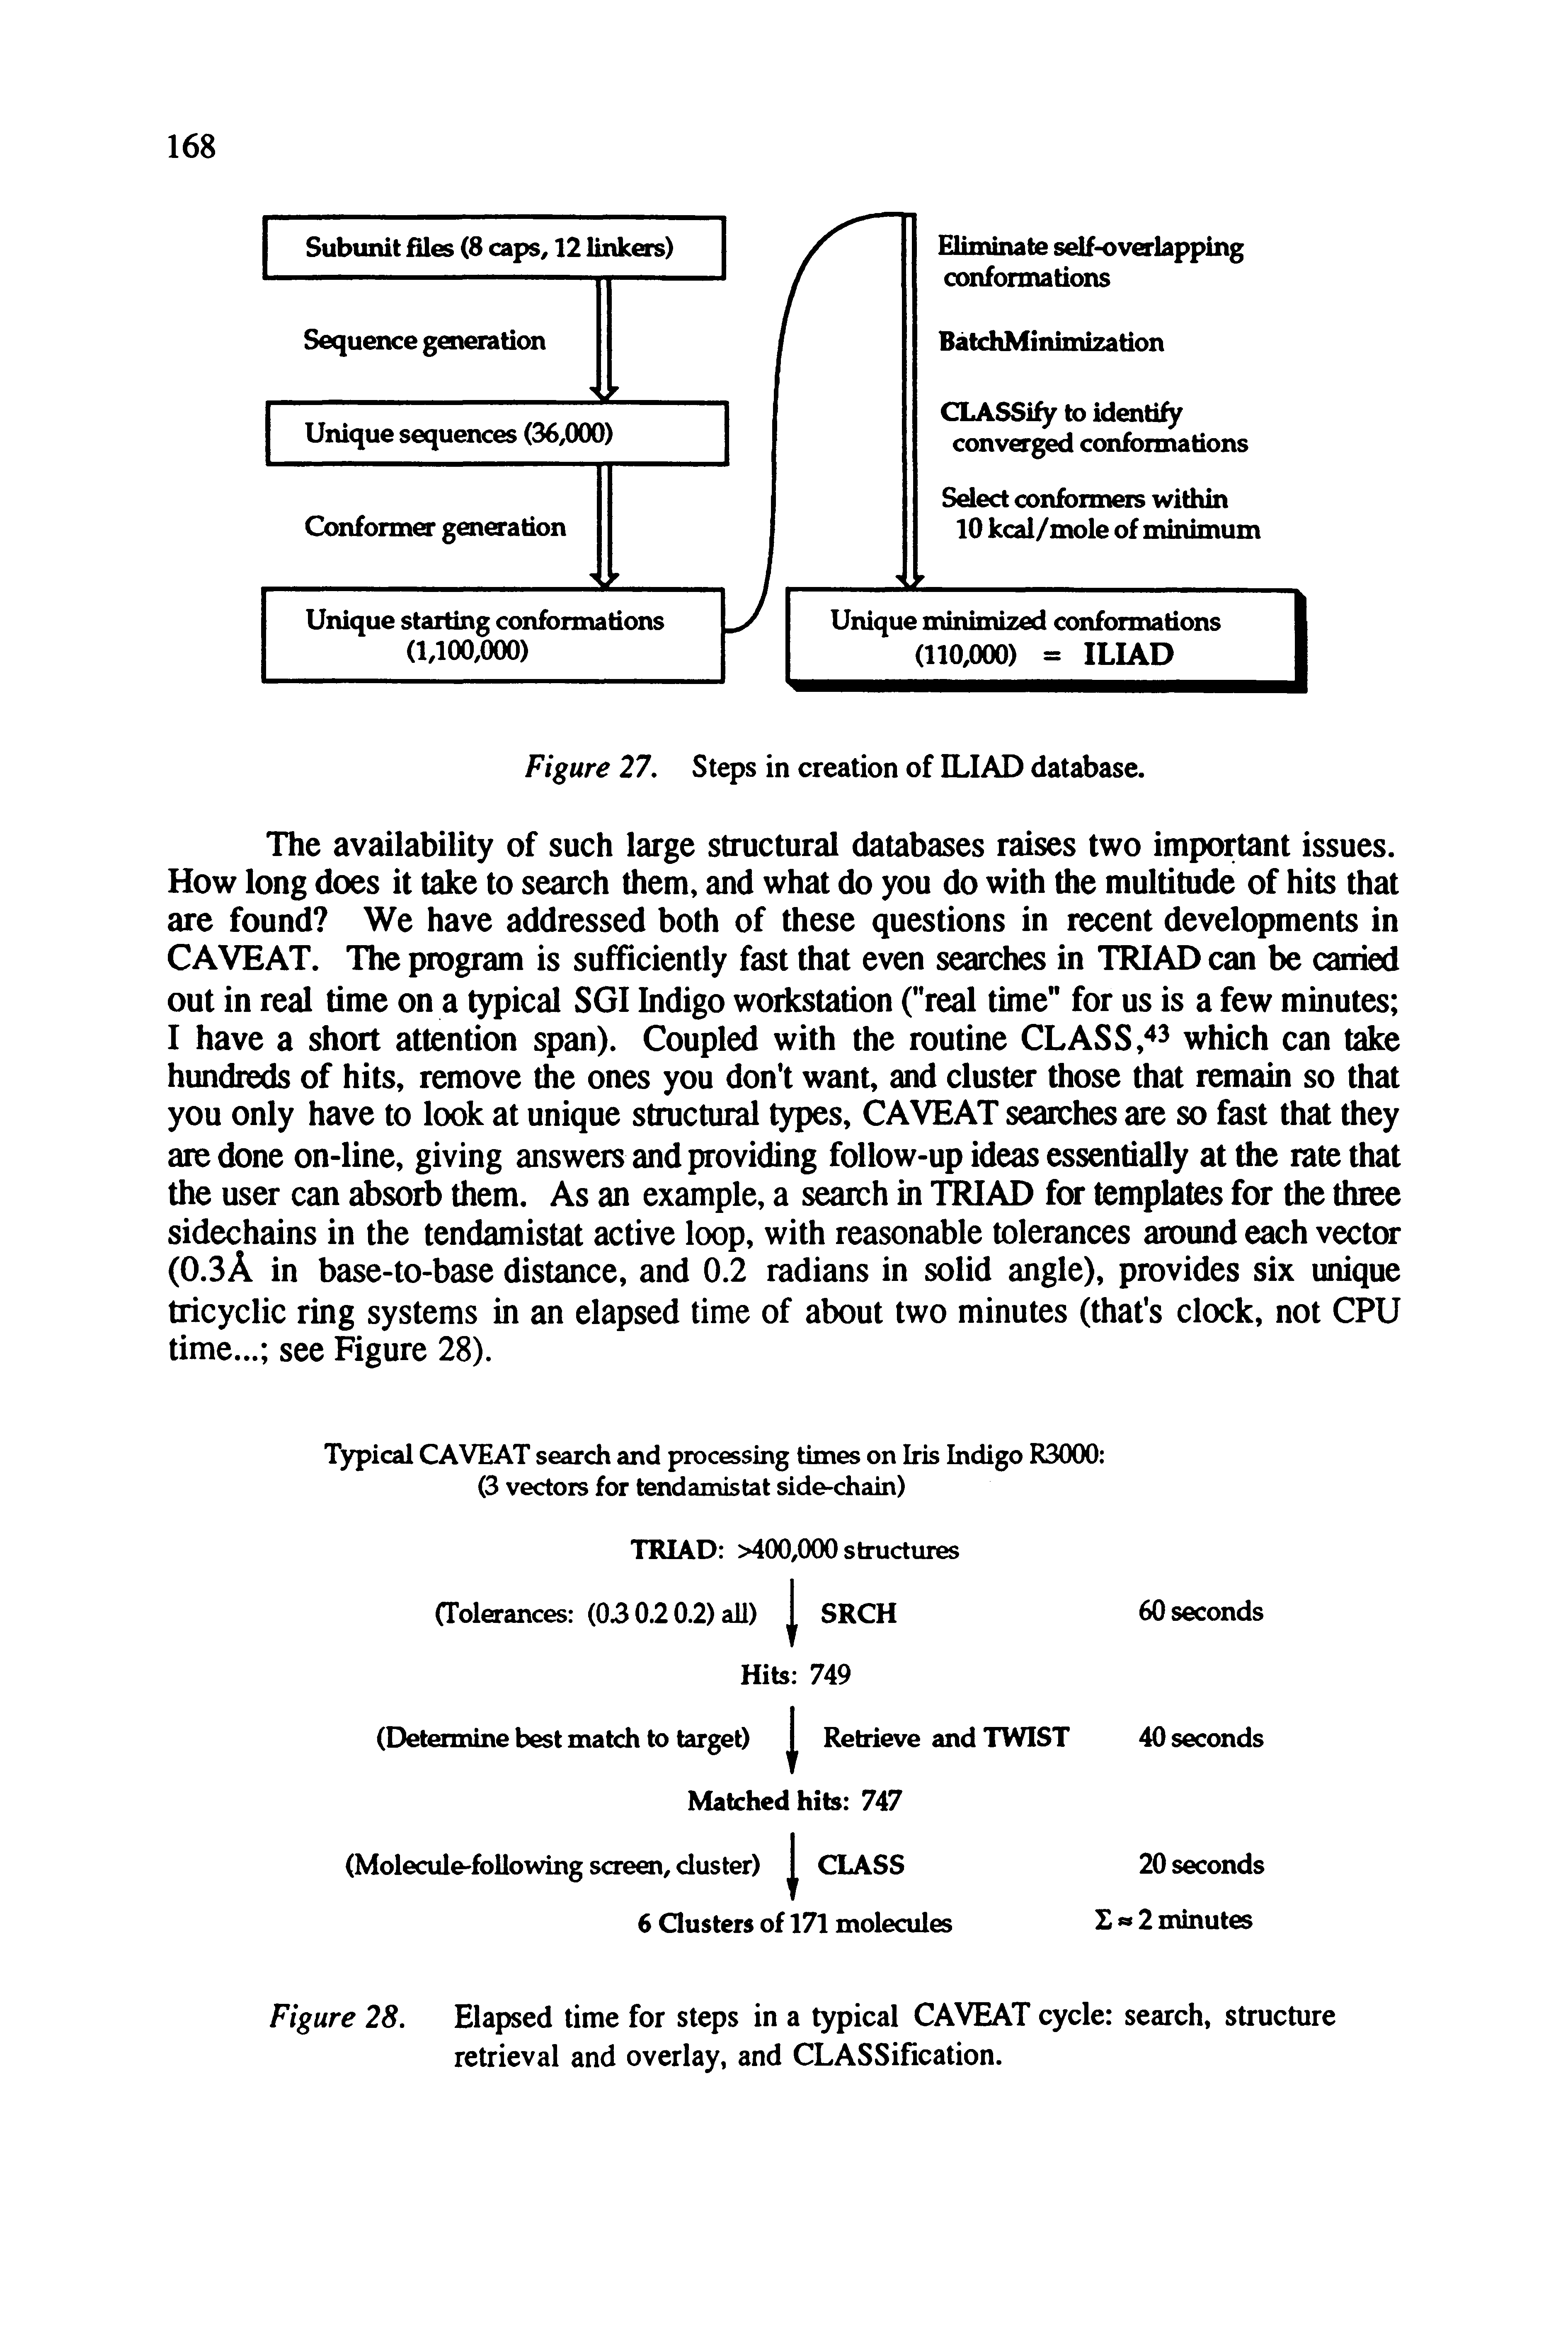 Figure 28. Elapsed time for steps in a typical CAVEAT cycle search, structure retrieval and overlay, and CLASSiEcation.